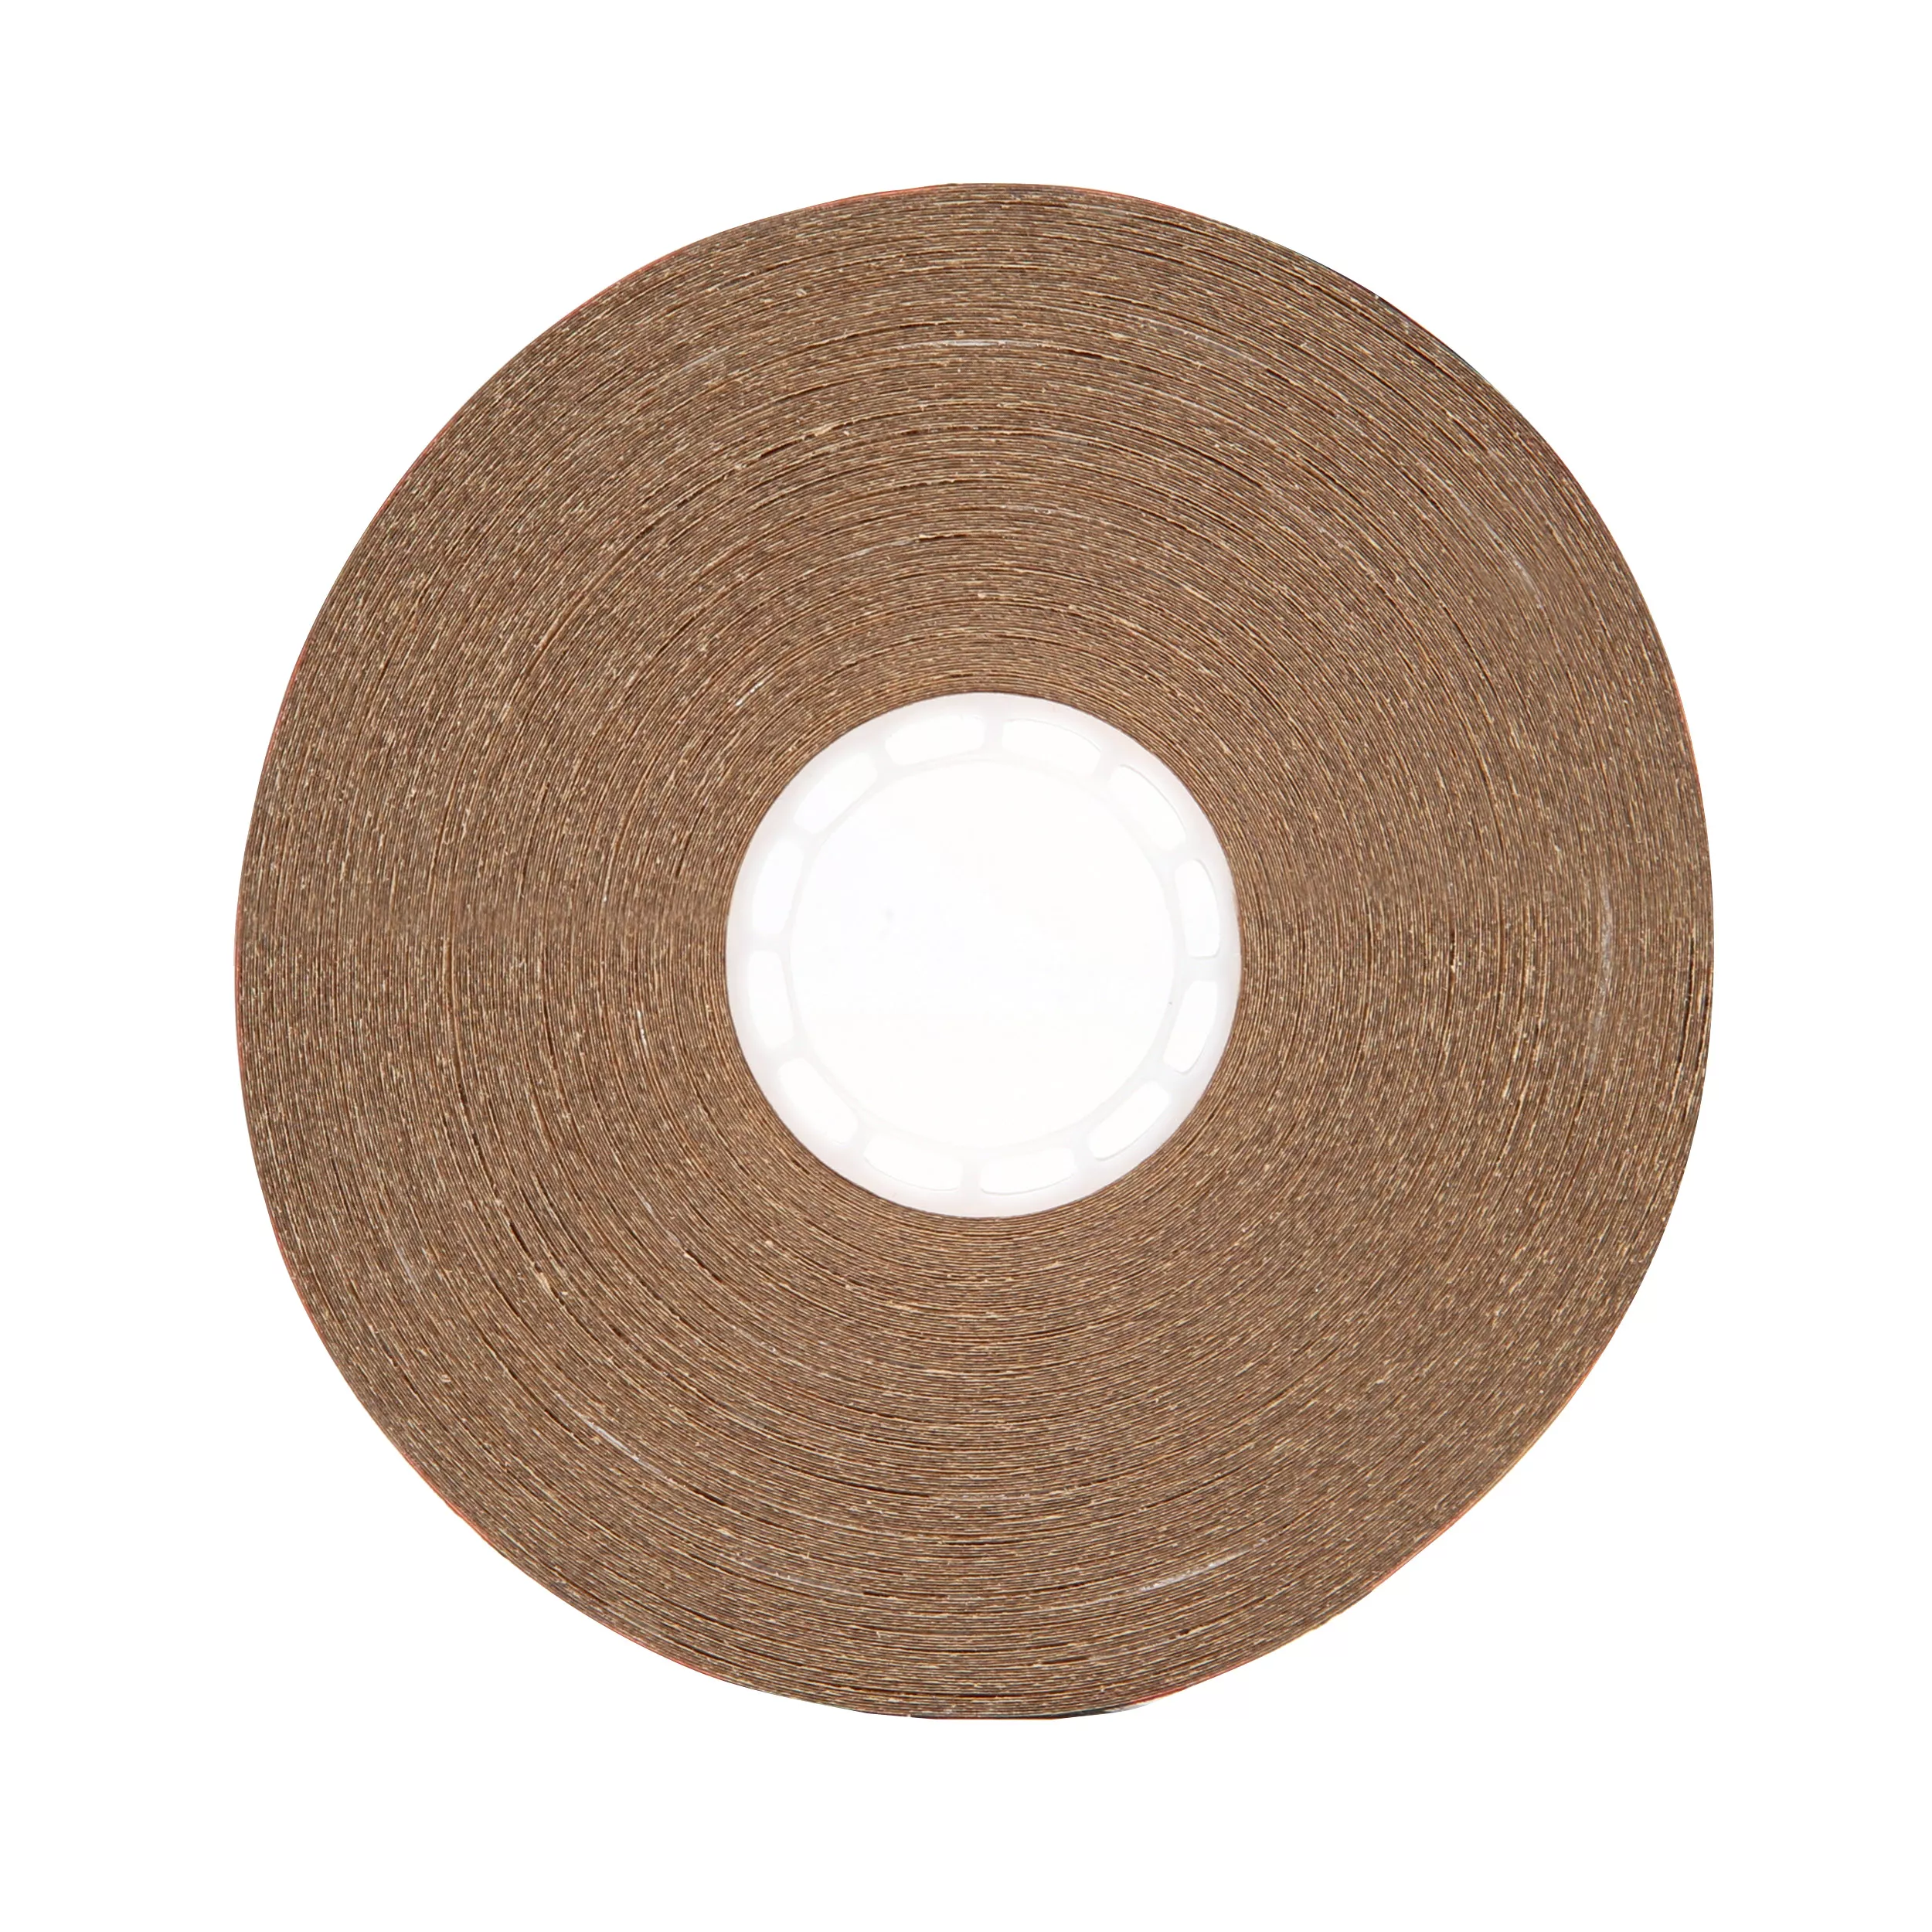 Product Number 969 | Scotch® ATG Adhesive Transfer Tape 969